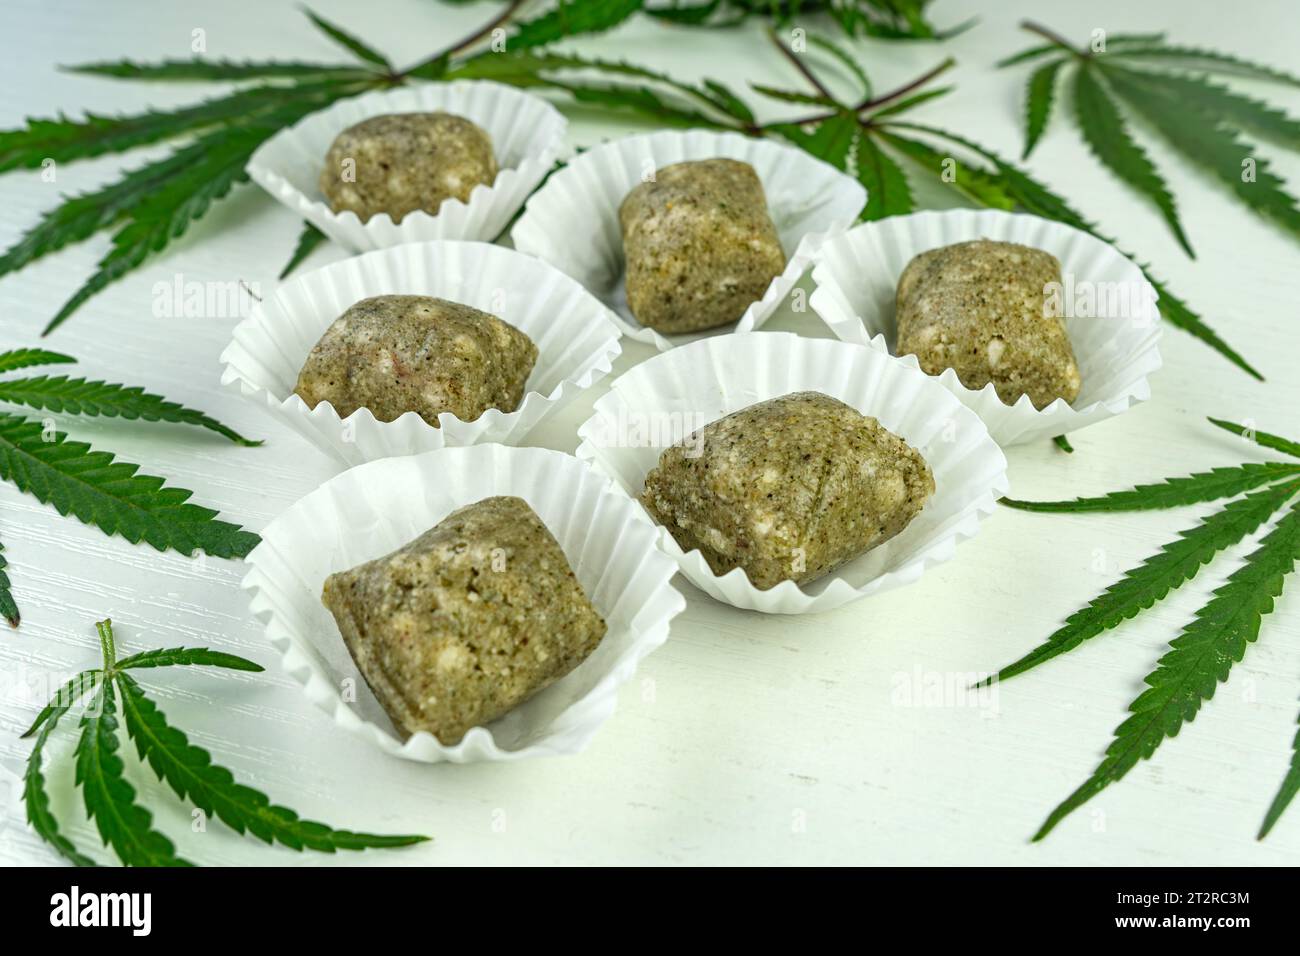 Homemade candy with hemp seeds and dates. Healthy vegan food on the blue table. a narcotic product. Legalization of light drugs Stock Photo